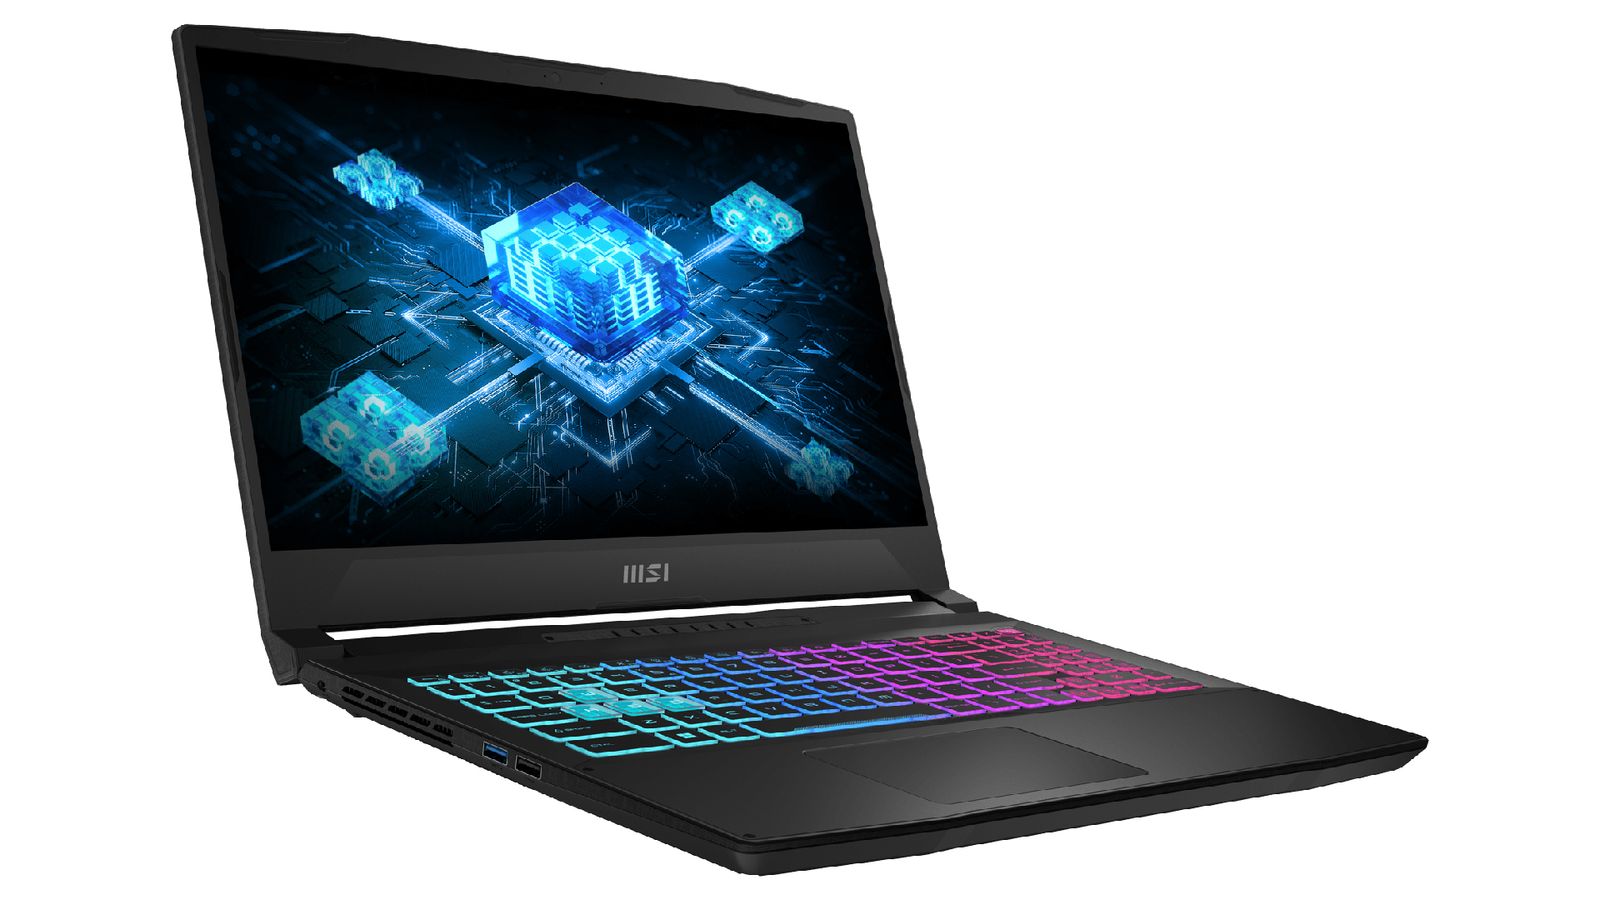 Best Forza gaming laptop - MSI Katana 15 product image of a black laptop featuring blue and purple backlit keys.